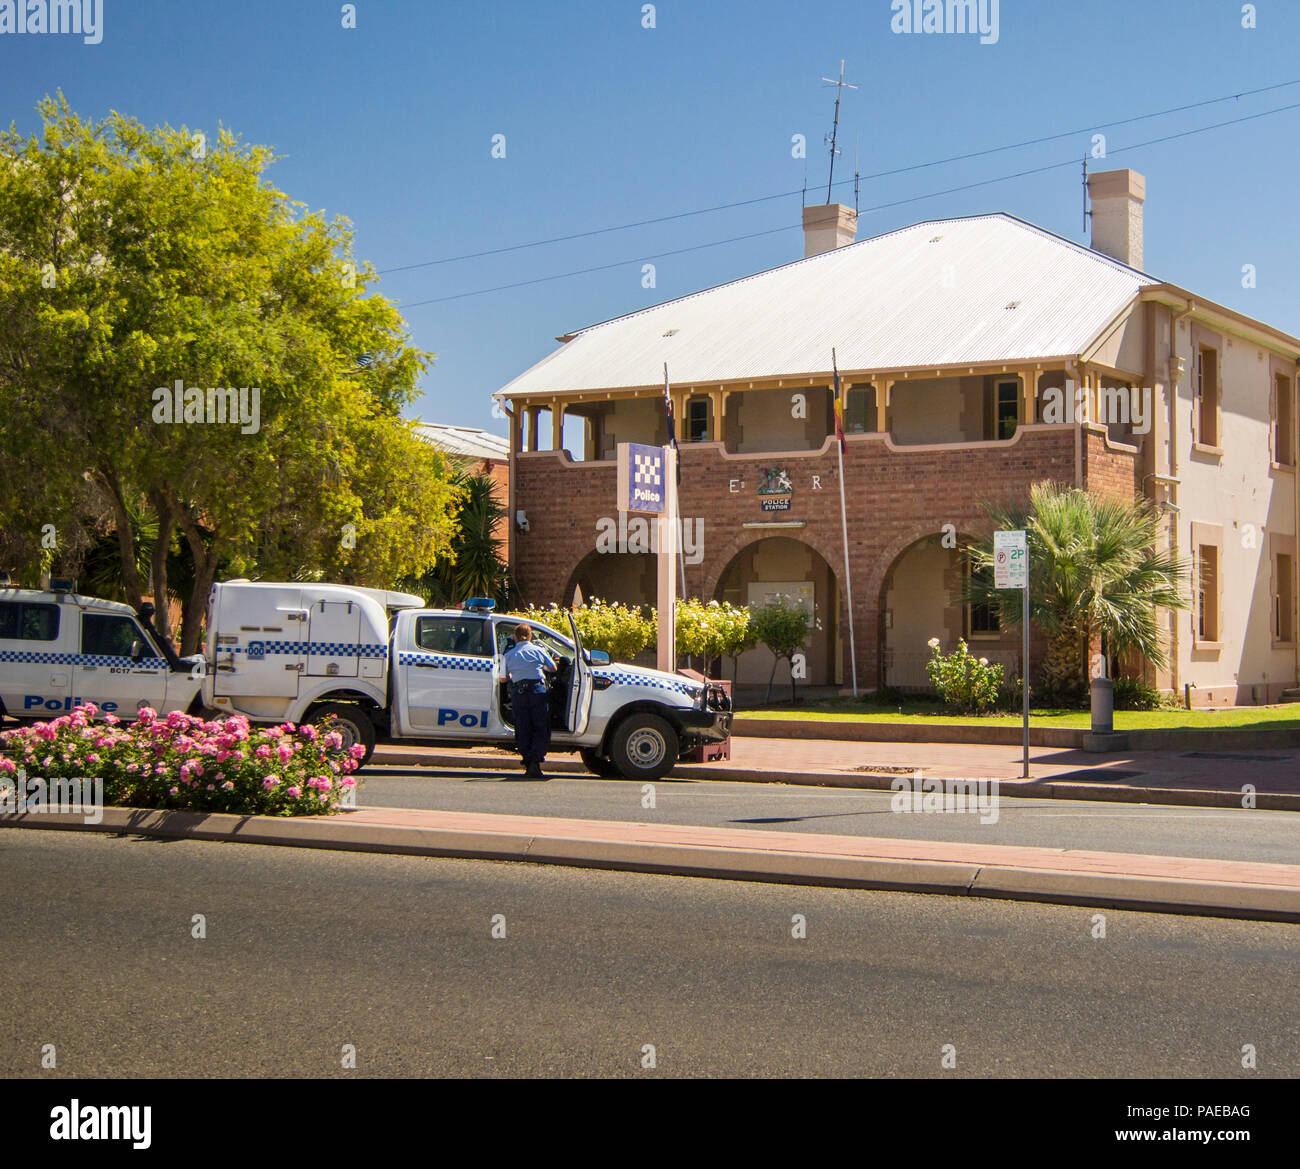 Police station and cars, with uniformed policewoman  in the city of Broken Hill, New South Wales, Australia Stock Photo